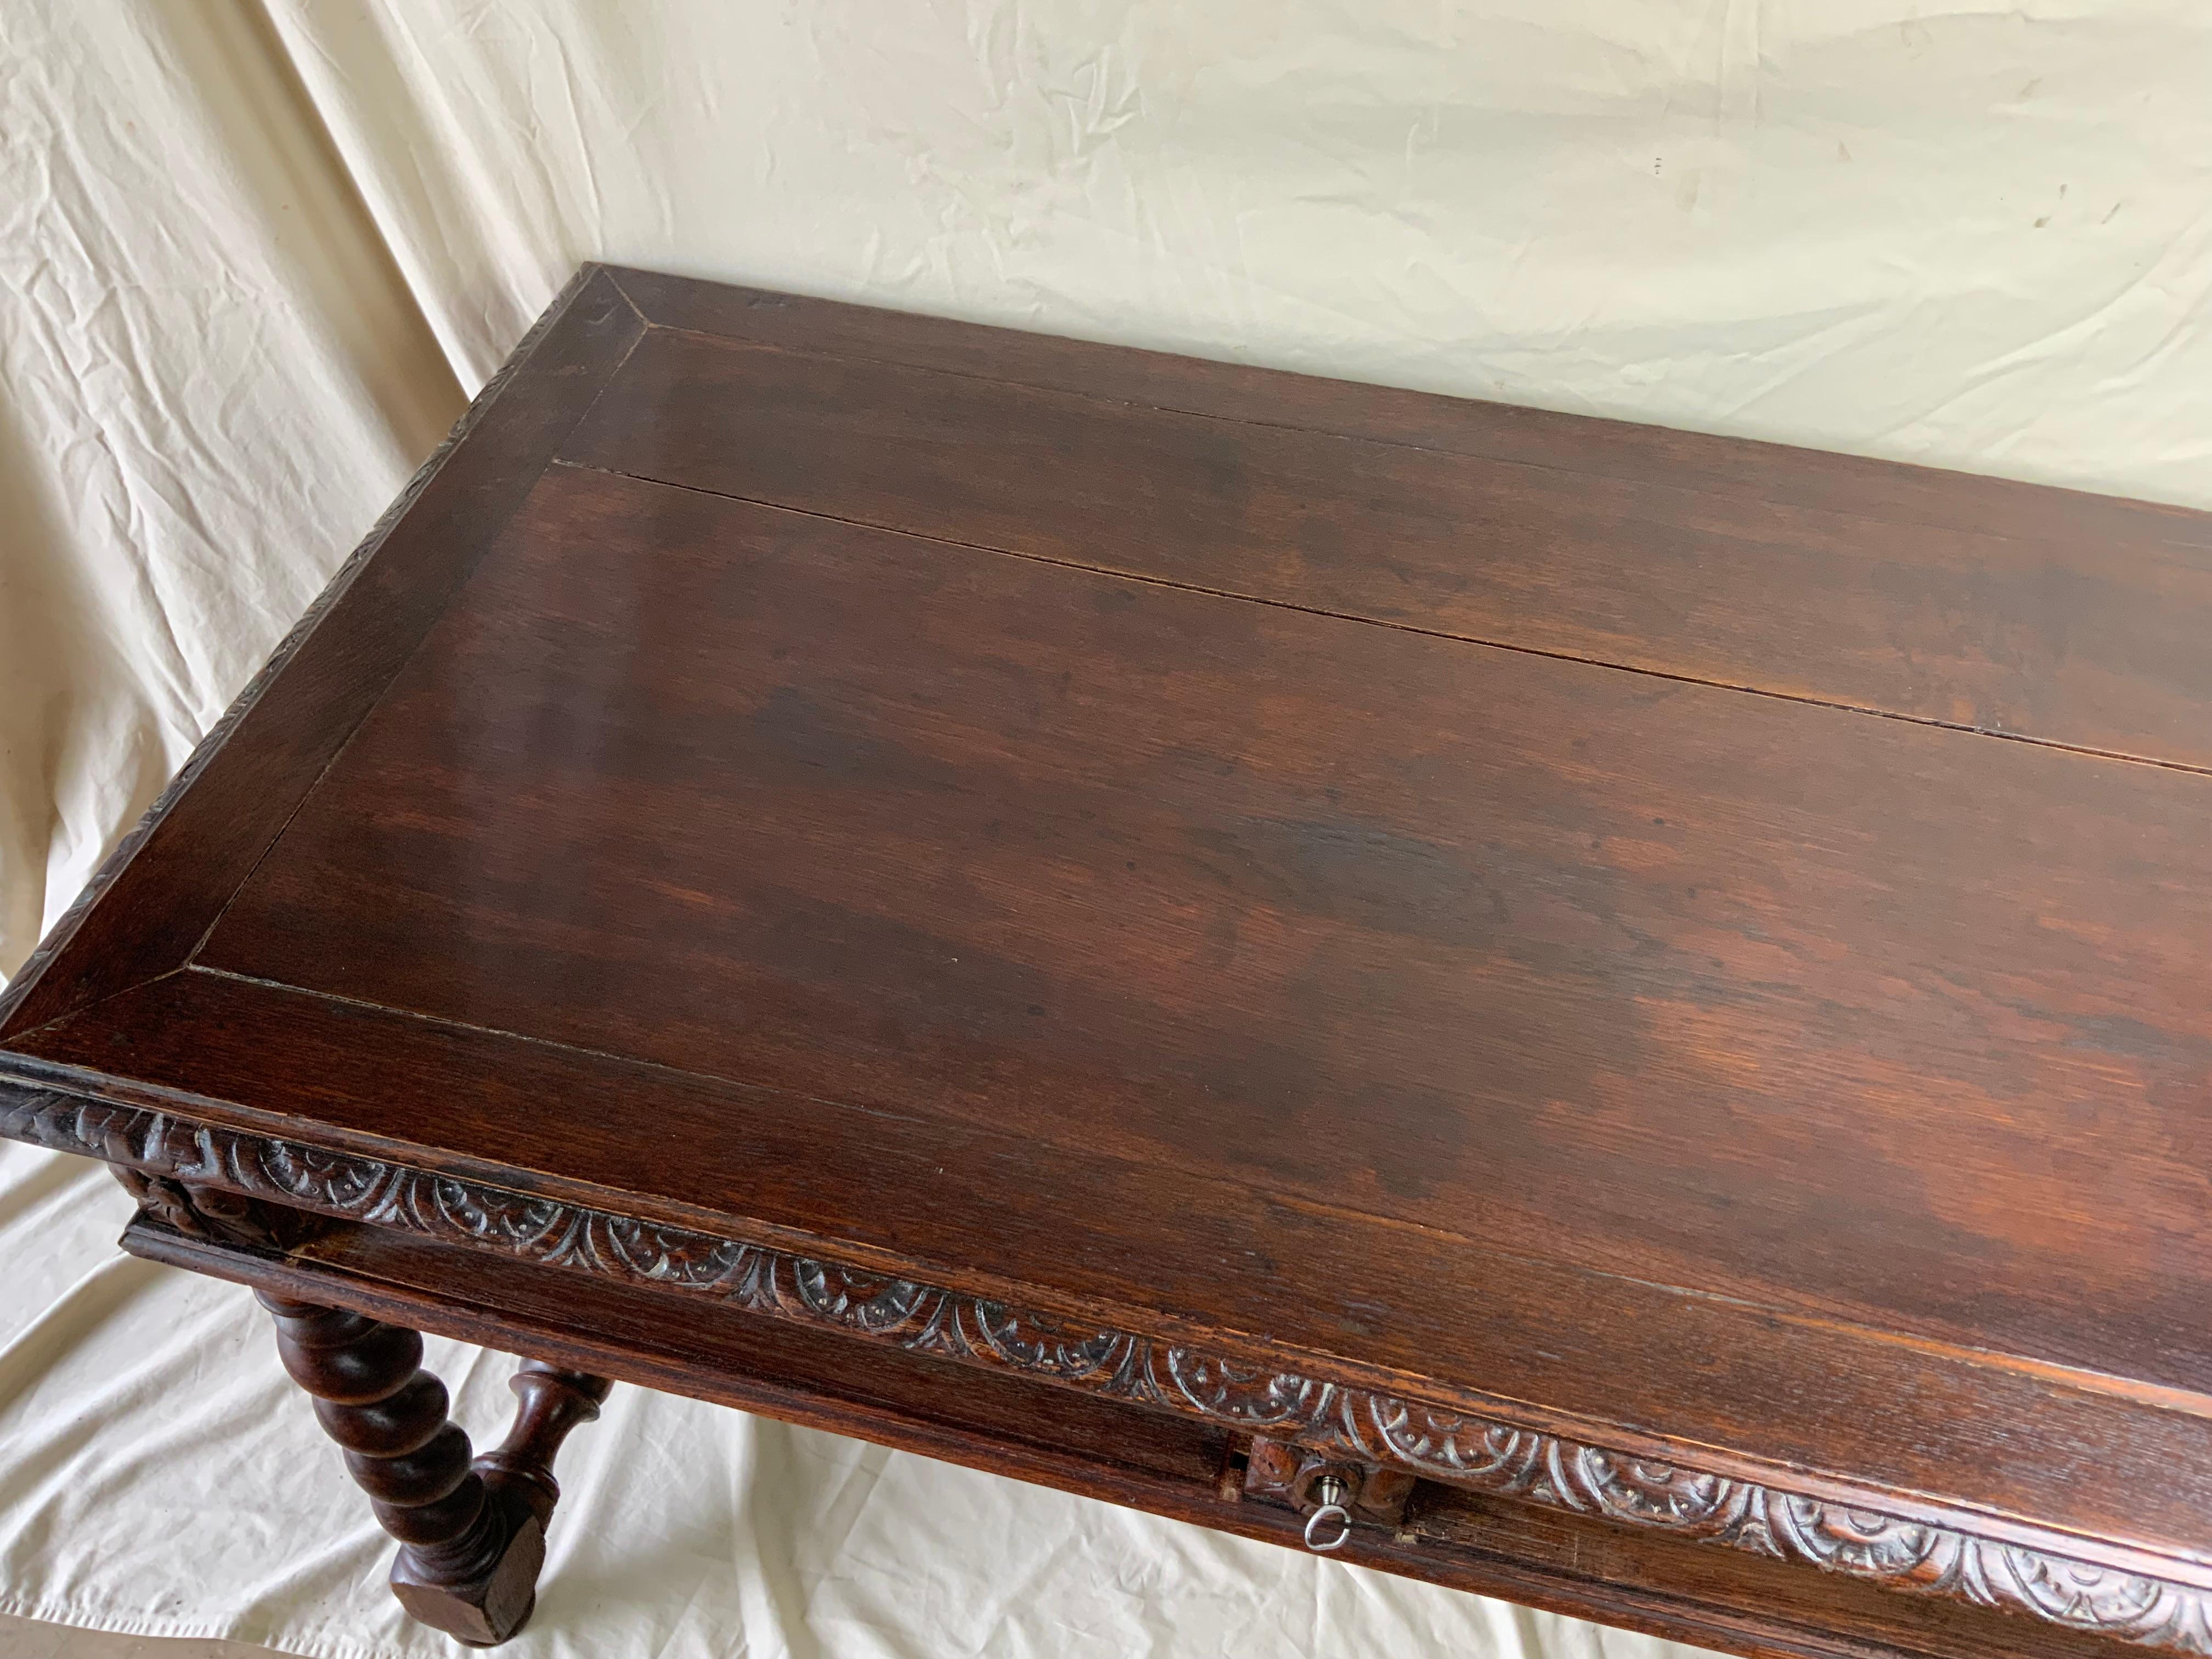 Wood Renaissance Revival French Writing Table